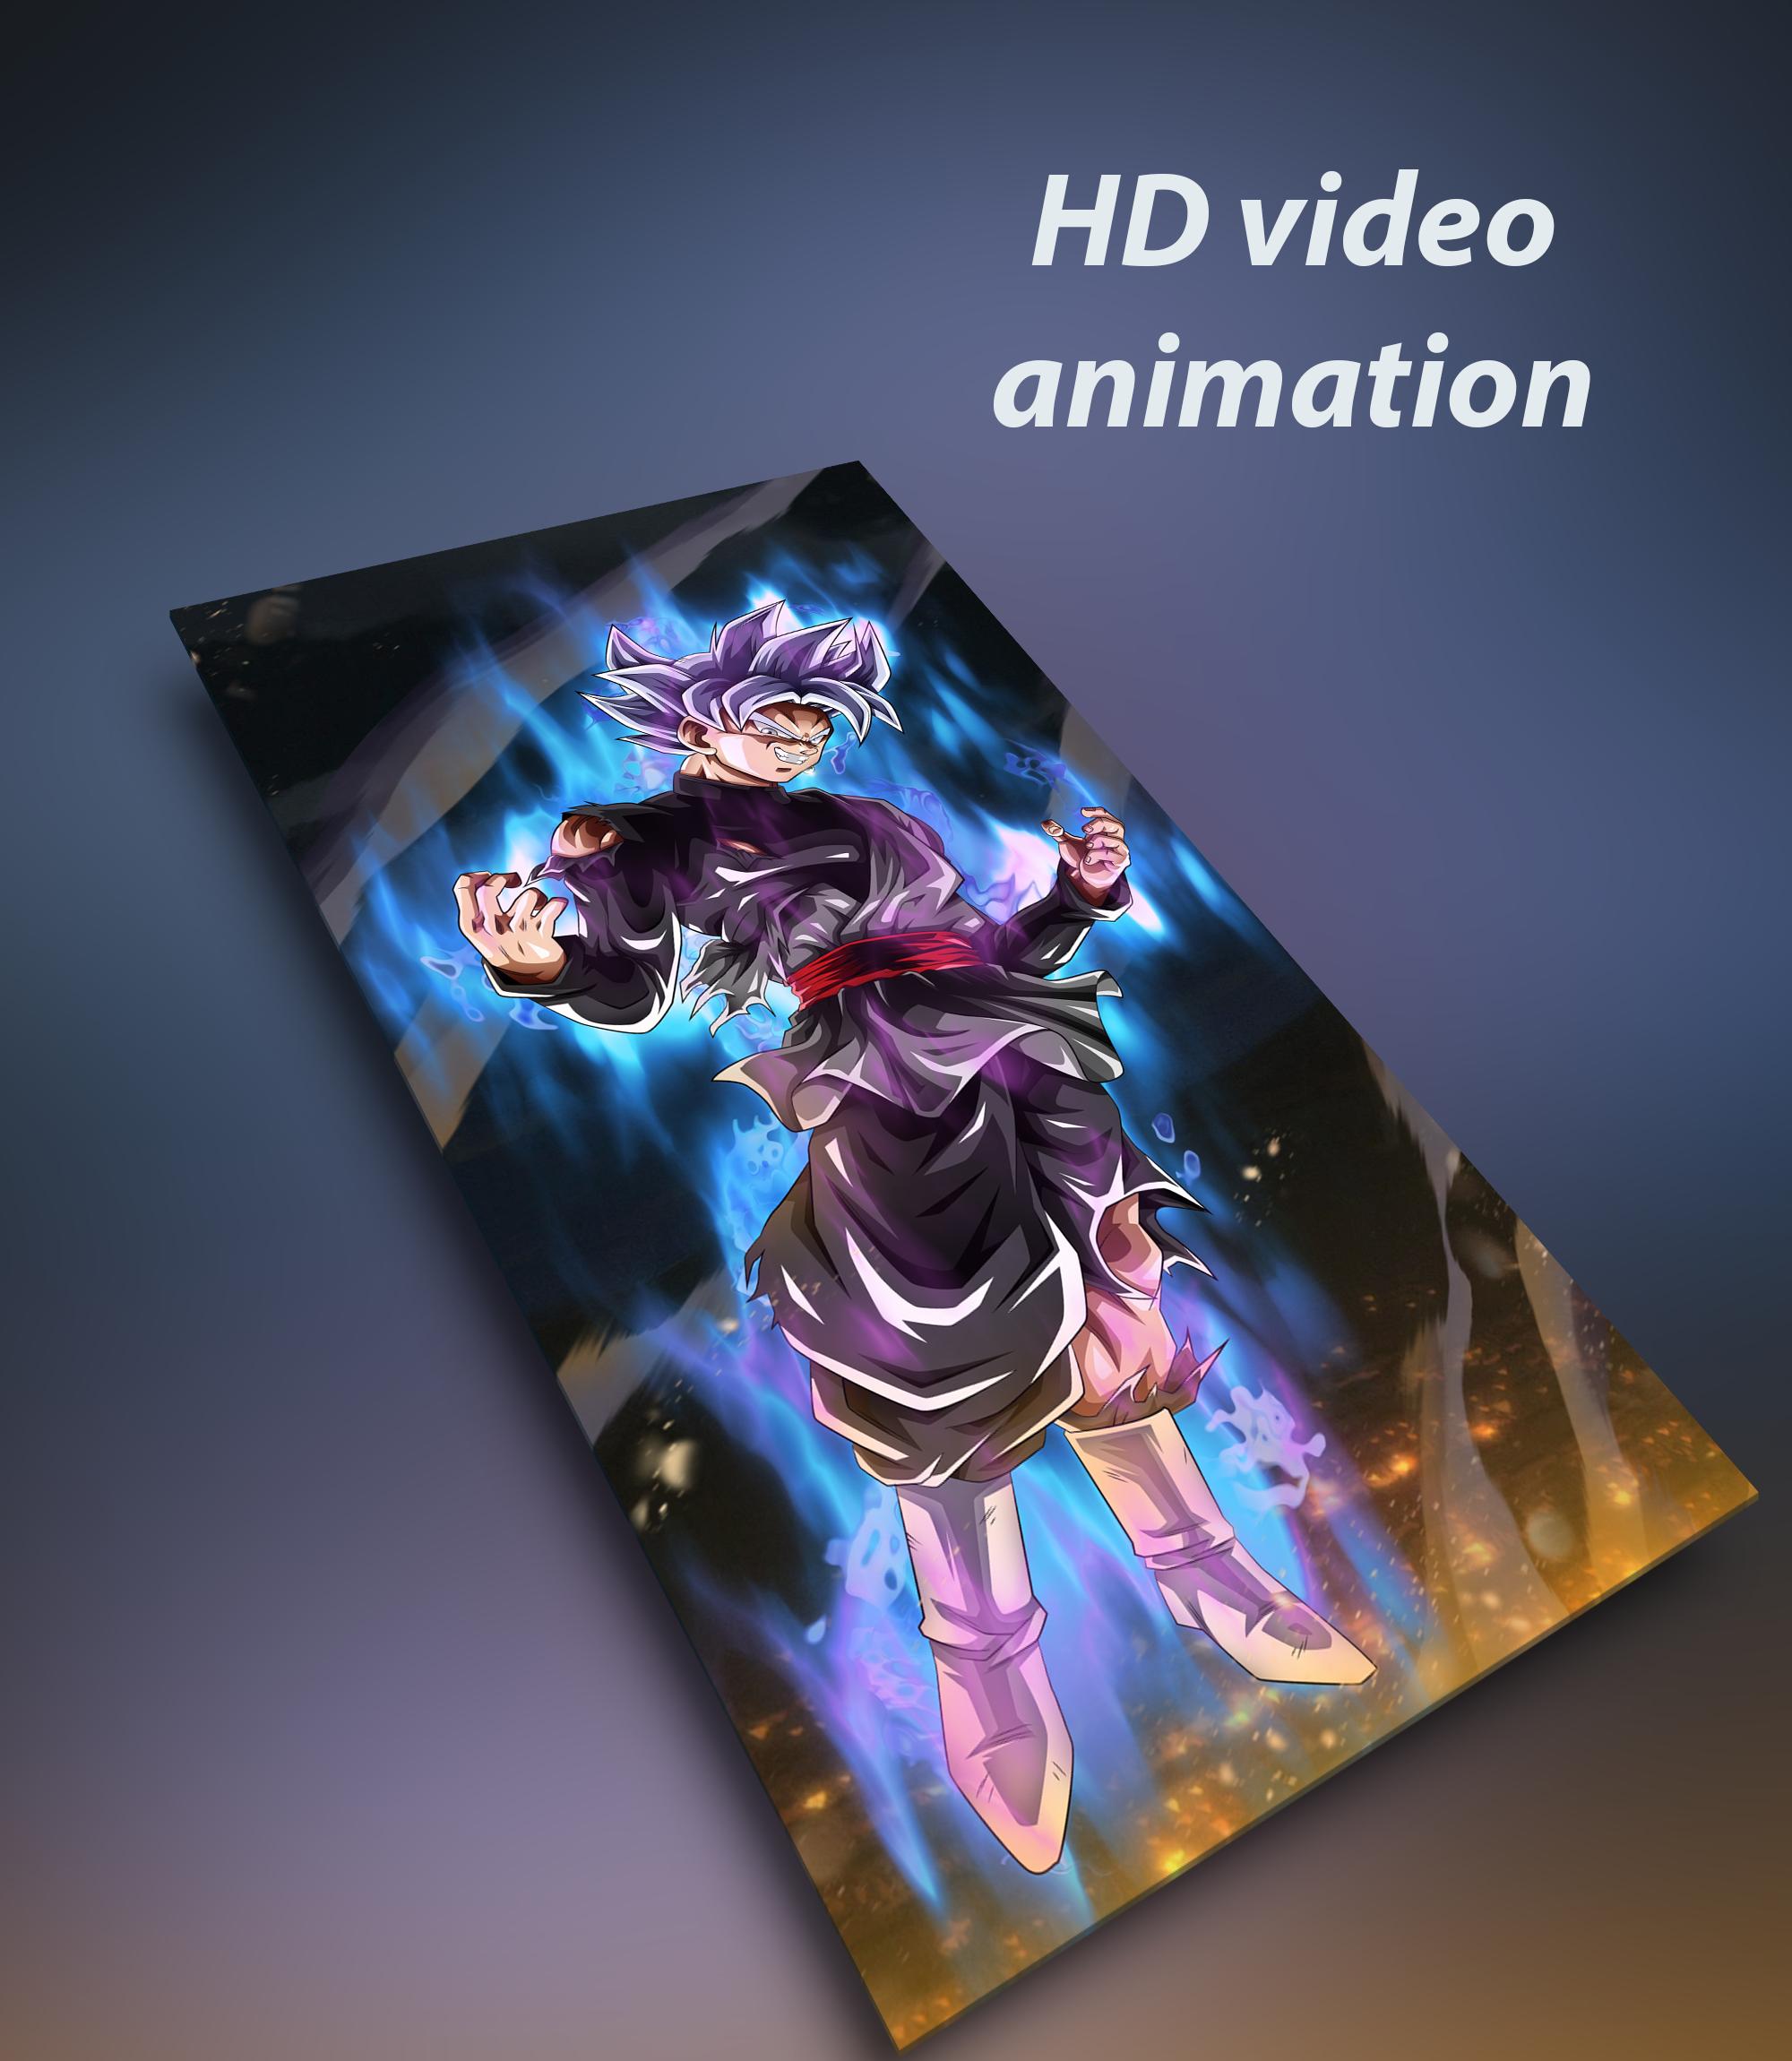 Anime live wallpaper (HD video) for Android - APK Download